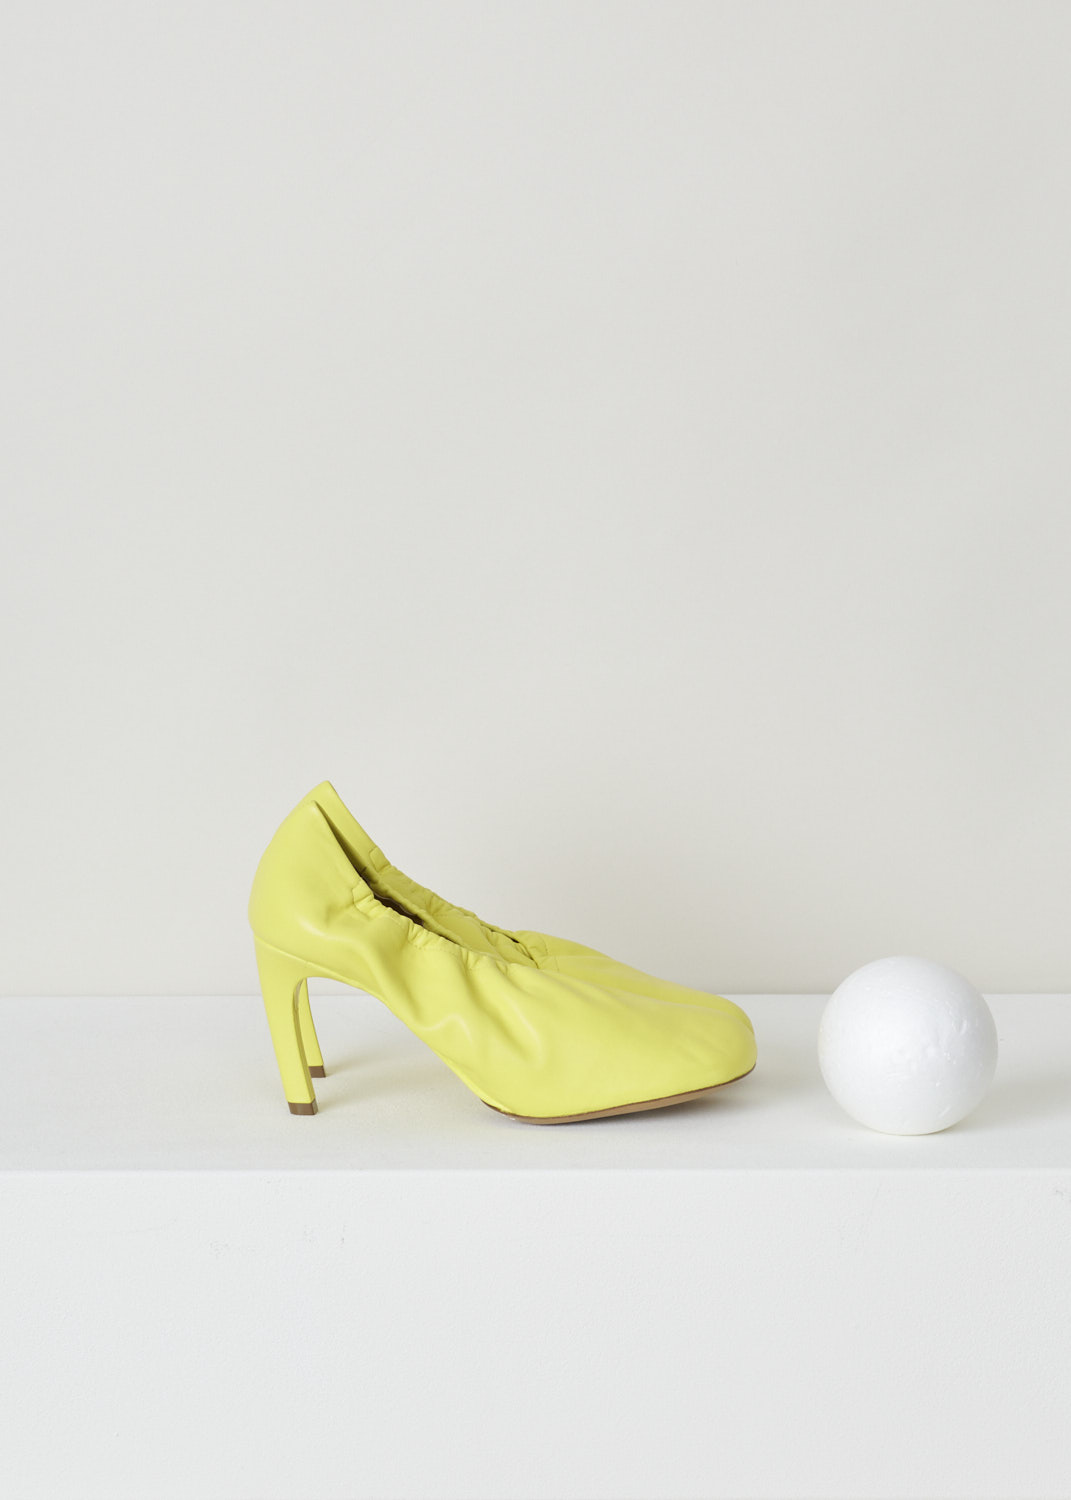 Dries van Noten, Yellow pump with an elastic fold-over vamp, WS211_138_H80_QU132_lime201, yellow, side, Yellow pumps made entirely out of soft and smooth calfskin. A quirky feature on this model is the elastic topline which folds over the toe vamp, ensuring a unique design feature. The toe vamp comes in a square format. Furthermore the heel is covered in yellow coloured leather.

Heel height: 7.5 cm / 2.95 inch.